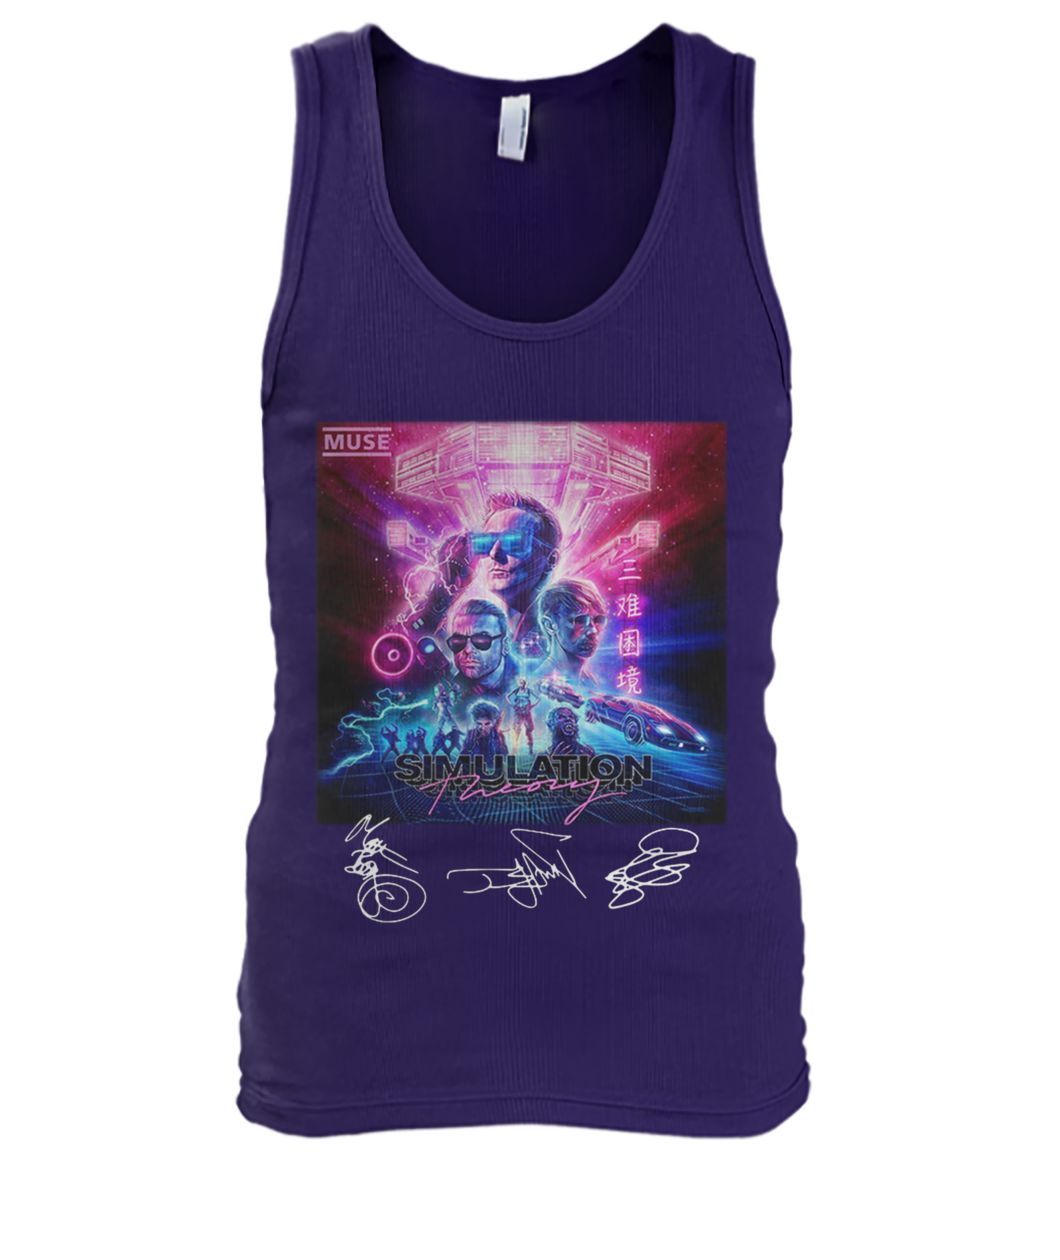 Muse simulation theory signatures men's tank top